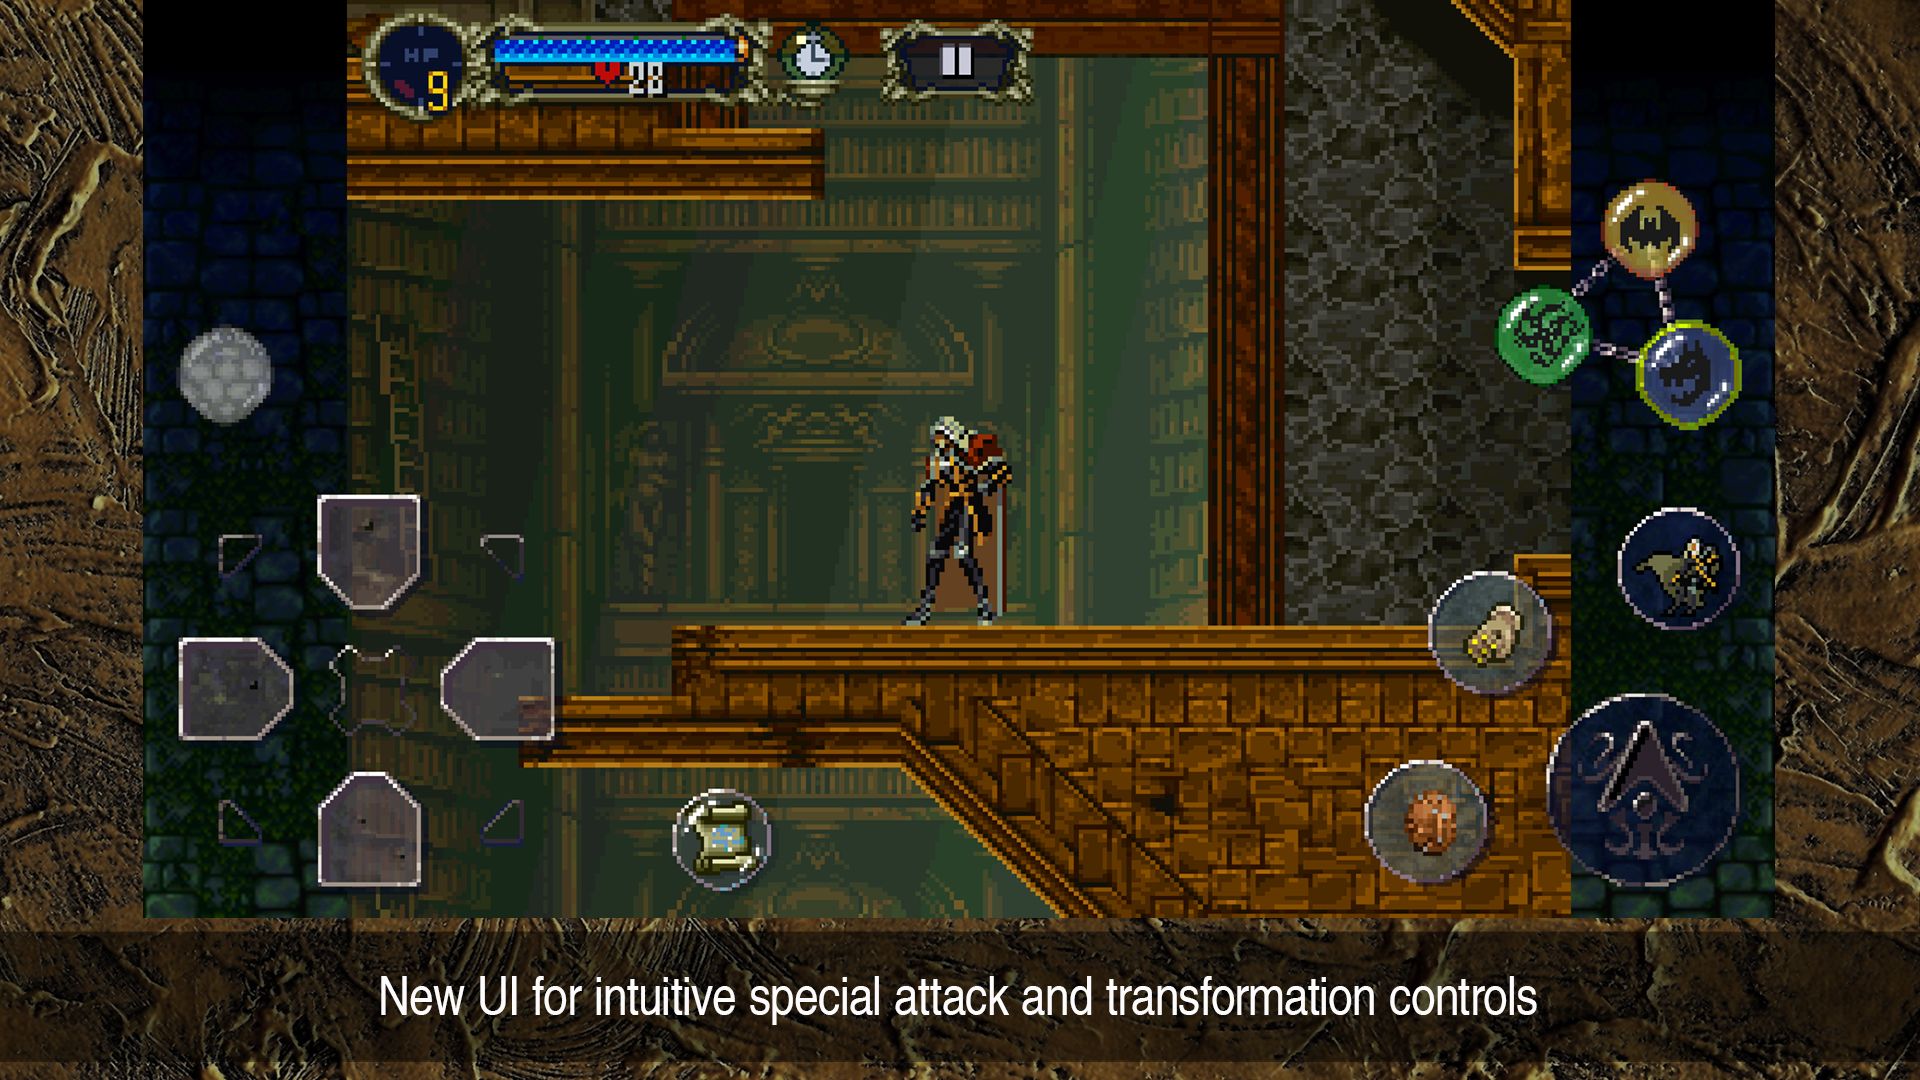 best-metroidvania-games-castlevania-symphony-of-the-night-new-ui-for-intuitive-special-attack-and-transformation-controls